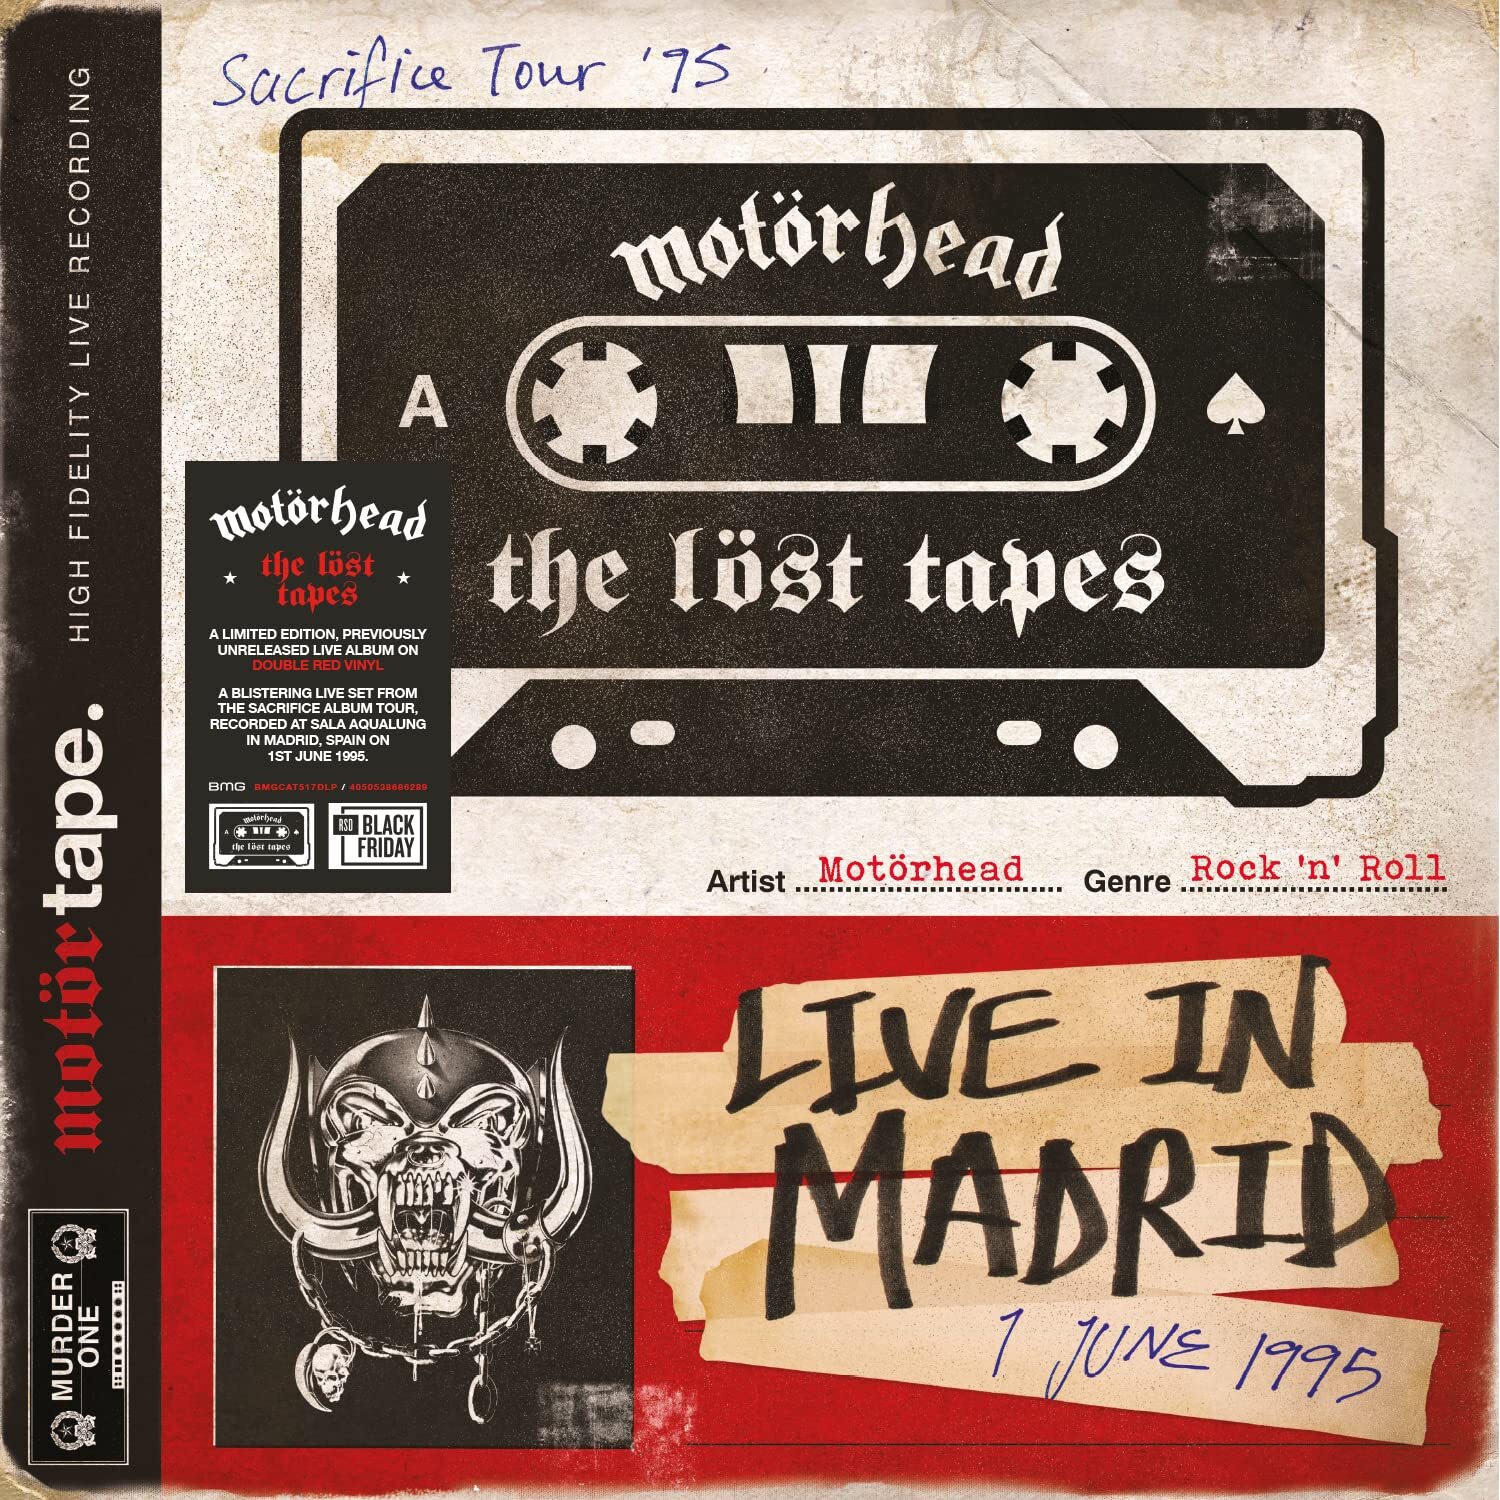 Рок Warner Music Motorhead - The Lost Tapes Vol. 1 Live In Madrid 1 June 1995 (Limited Edition Coloured Vinyl 2LP) хип хоп sony music tyler the creator call me if you get lost the estate sale coloured vinyl 3lp